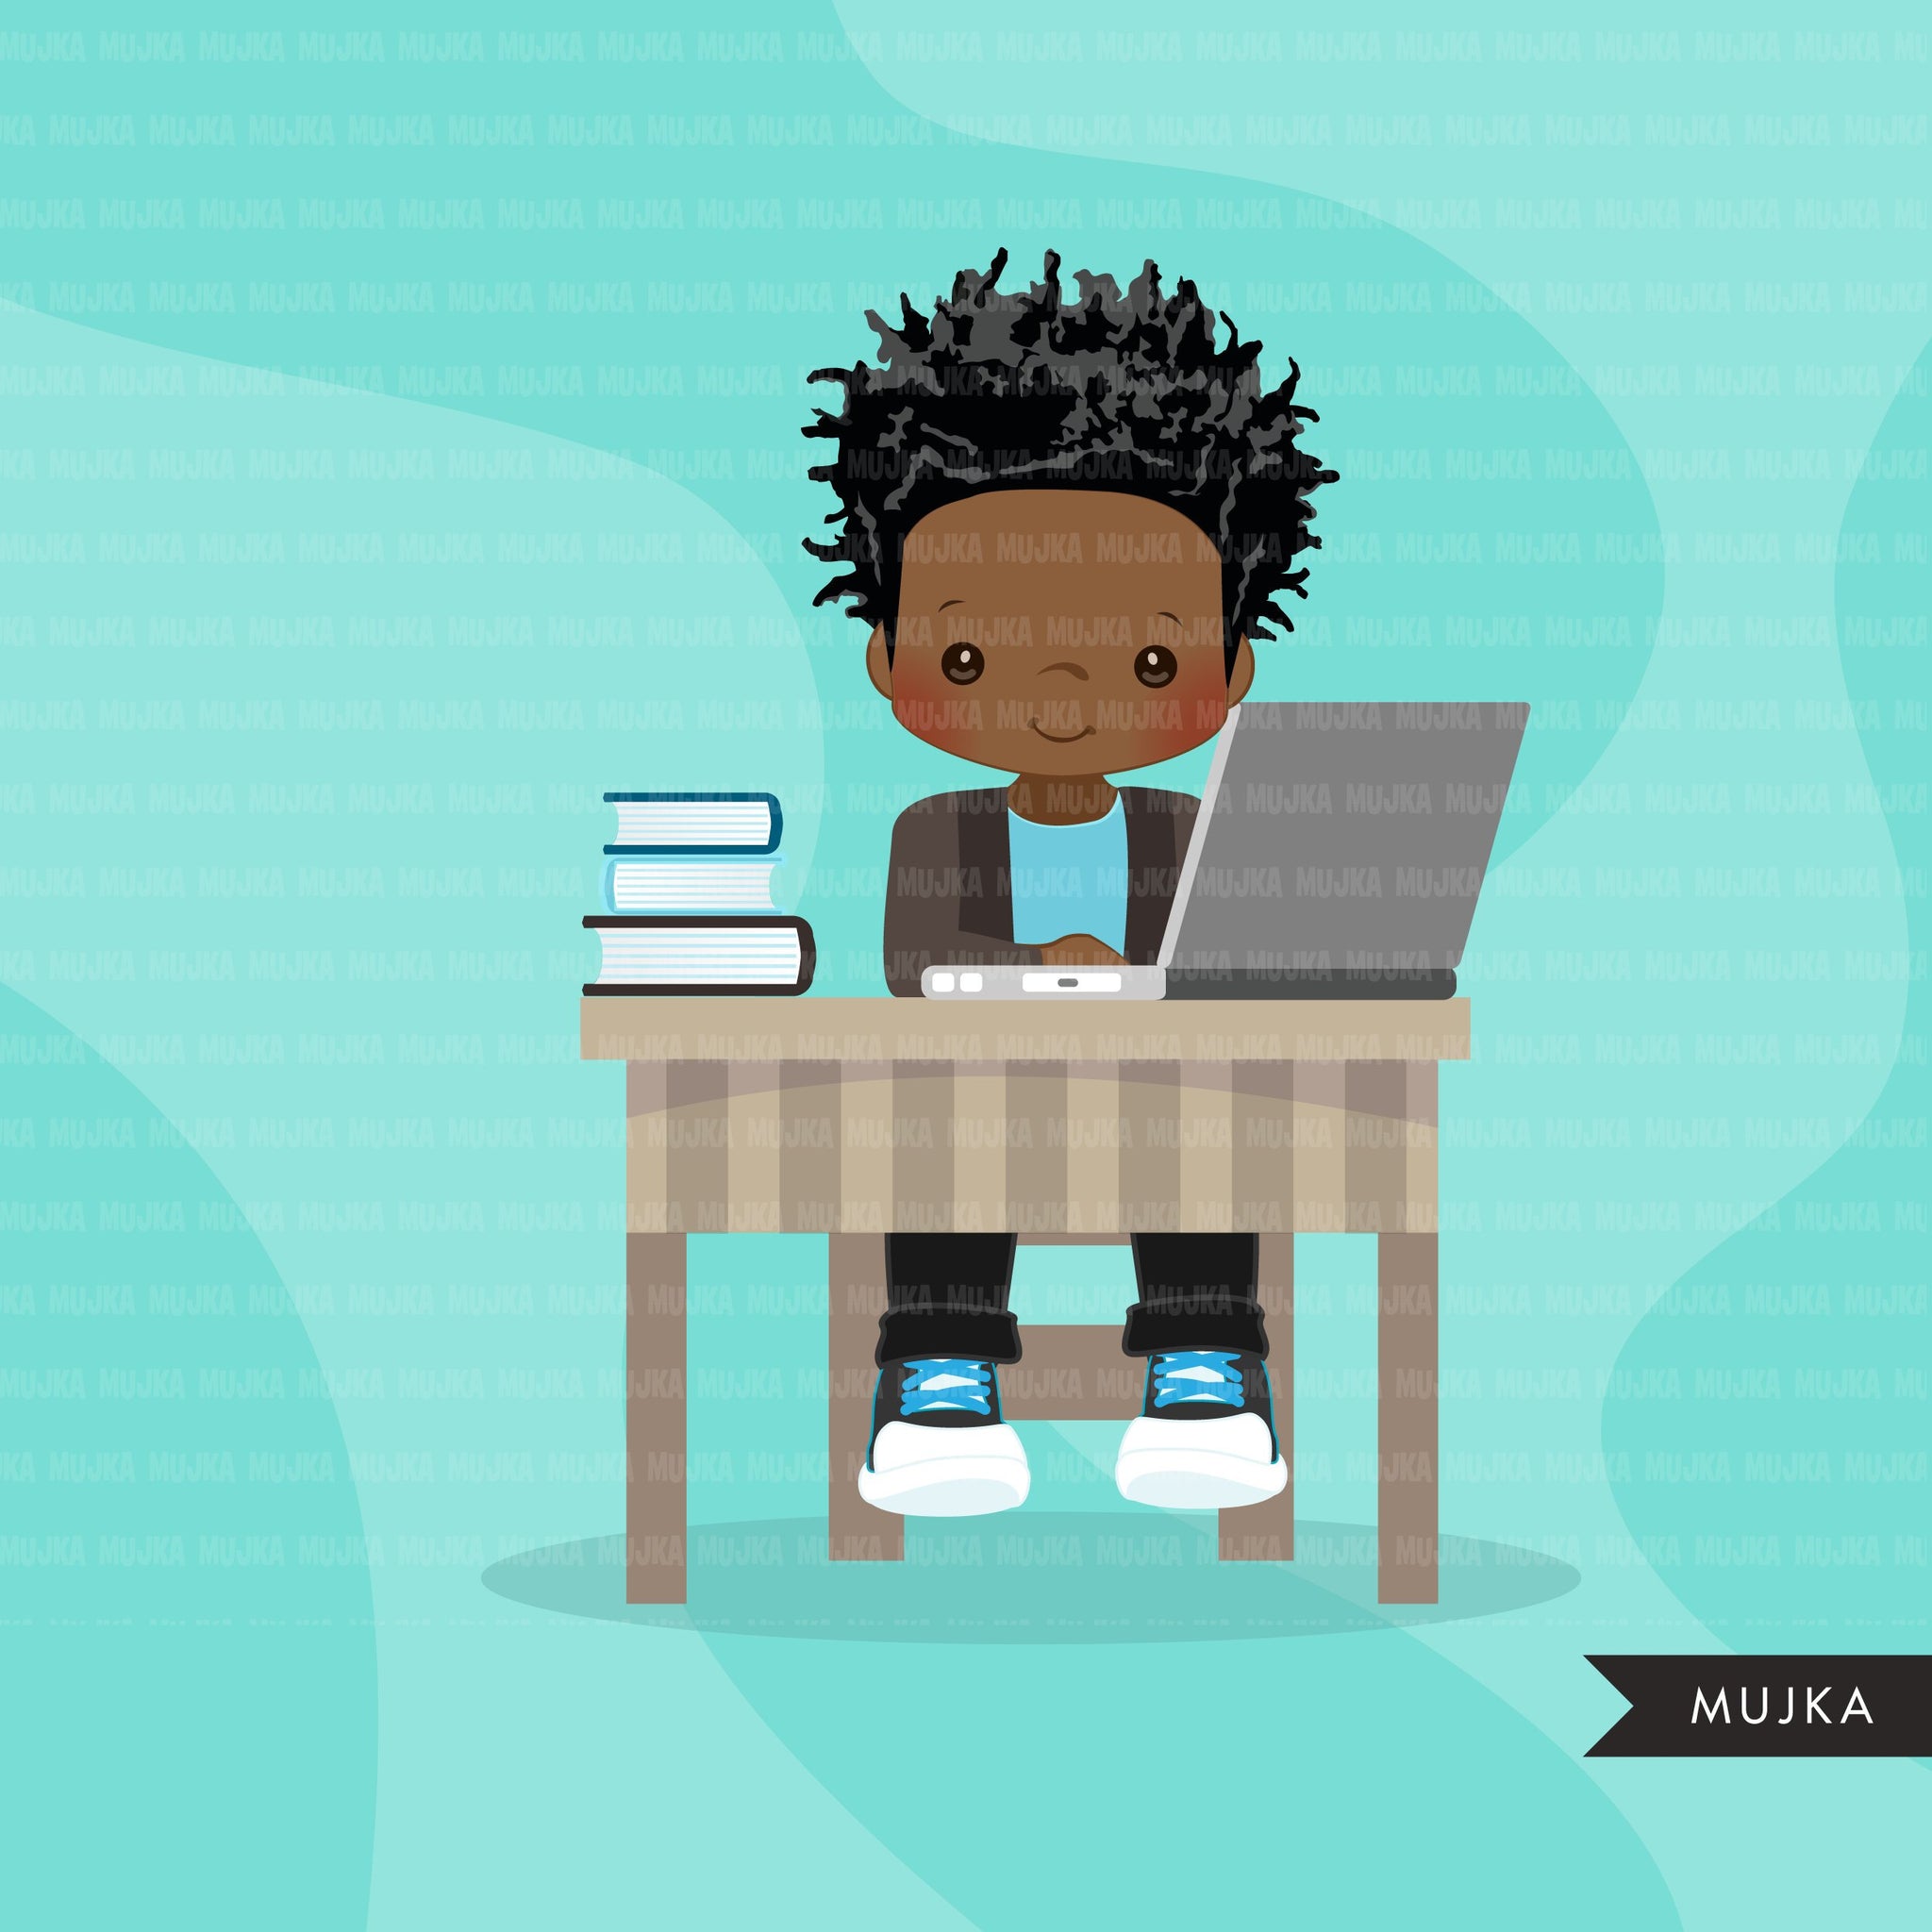 Distant Learning Clipart, Black Boys with laptop, homeschooling, student homework, shop logo graphics, Png clip art